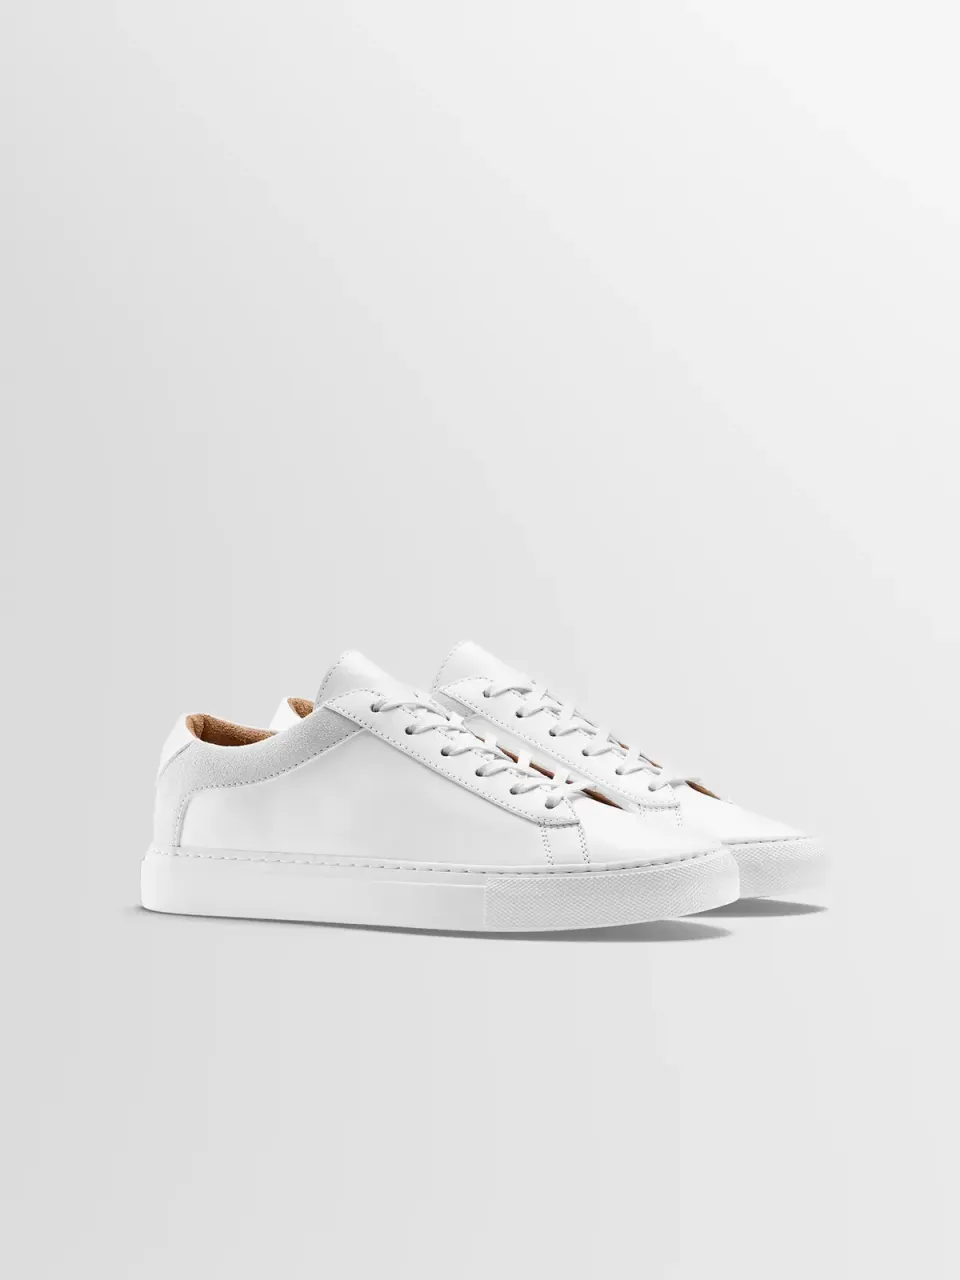 These Are The Best White Sneakers That Aren’t Air Force 1s | HuffPost Life